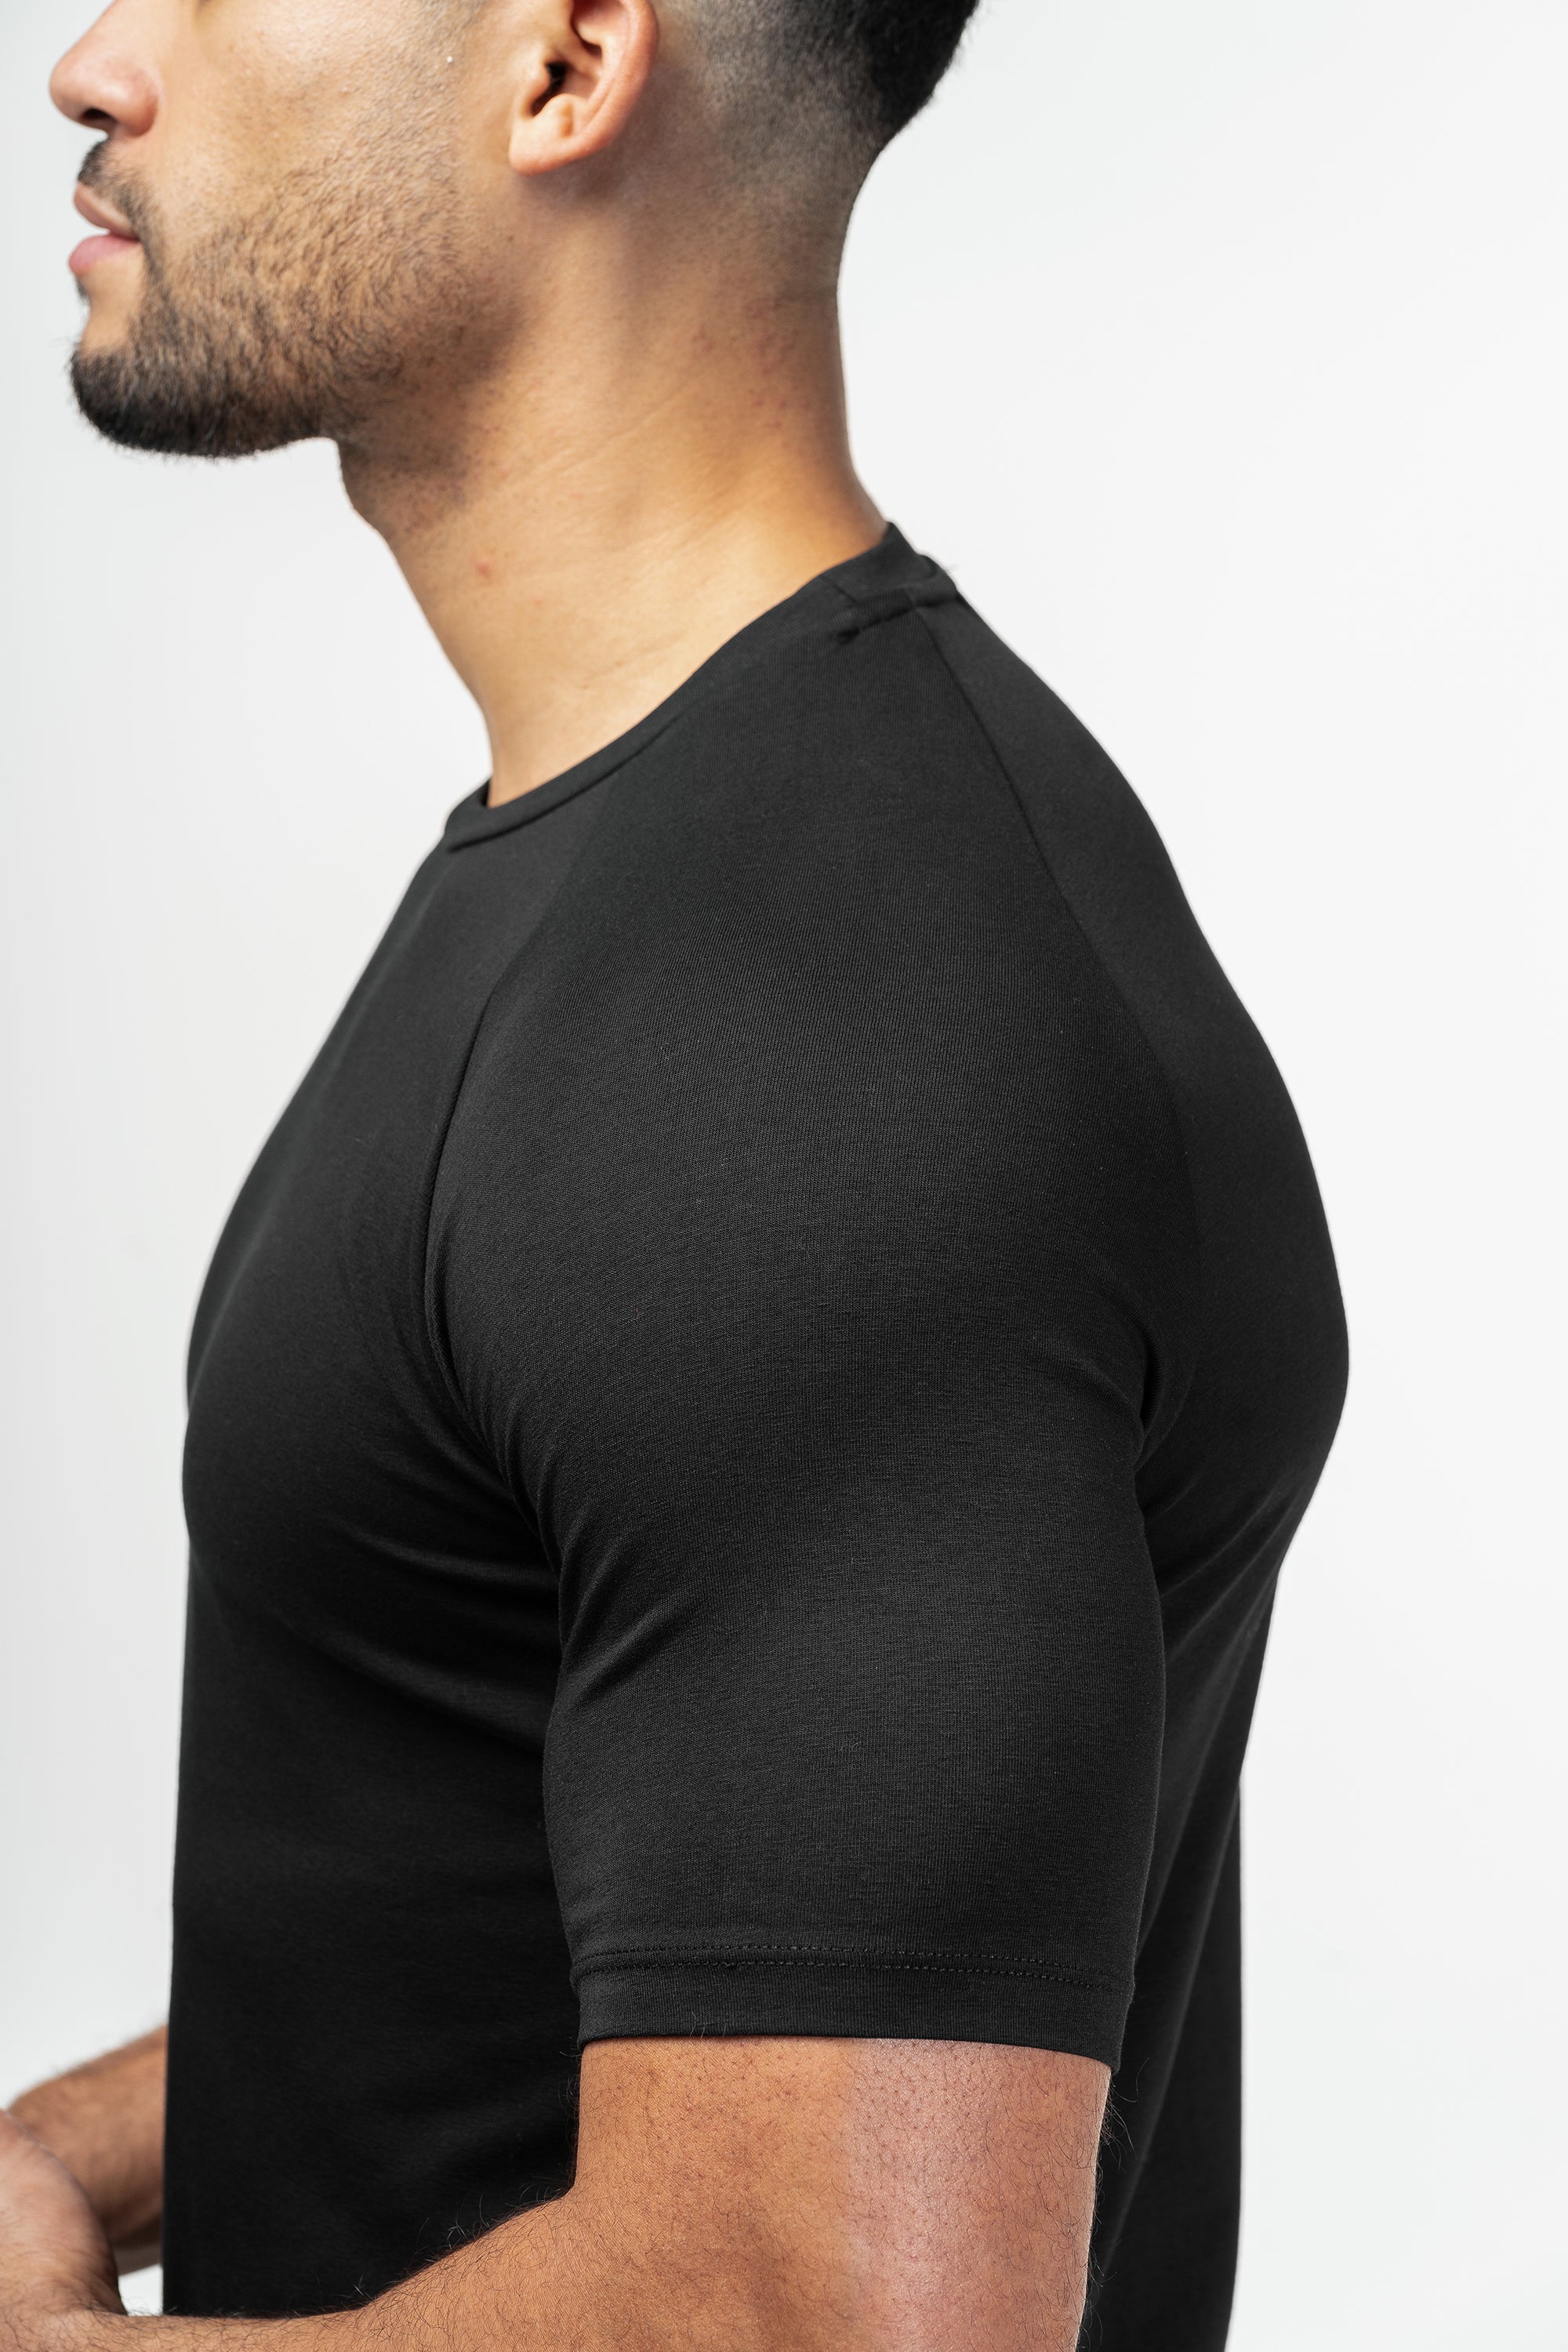 THE MUSCLE BASIC T-SHIRT - BLACK